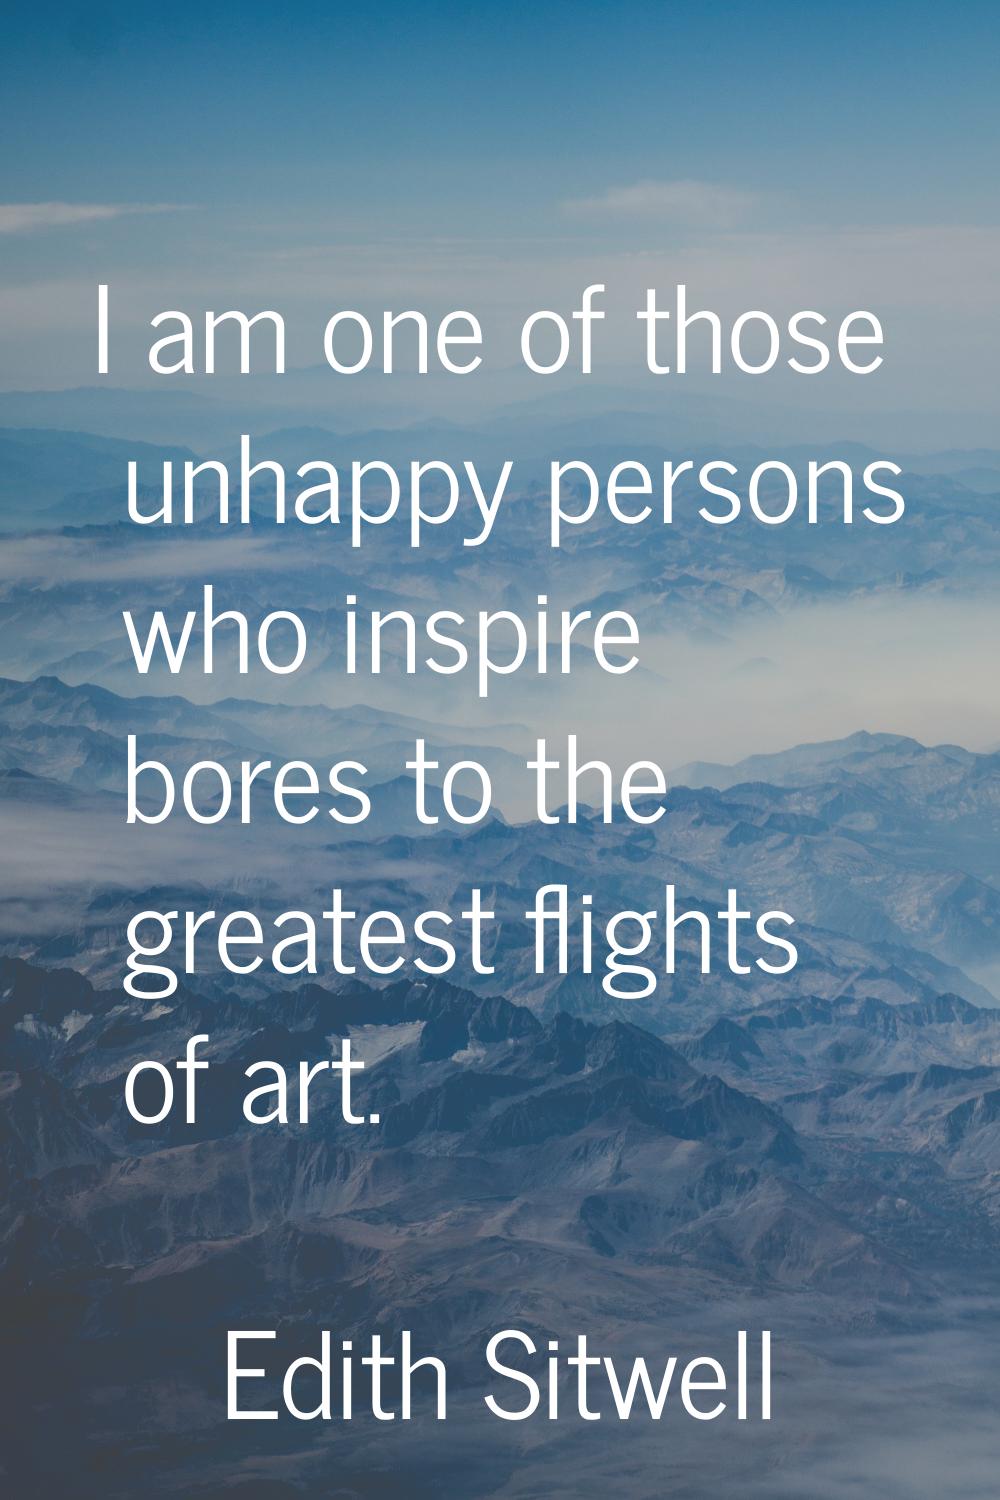 I am one of those unhappy persons who inspire bores to the greatest flights of art.